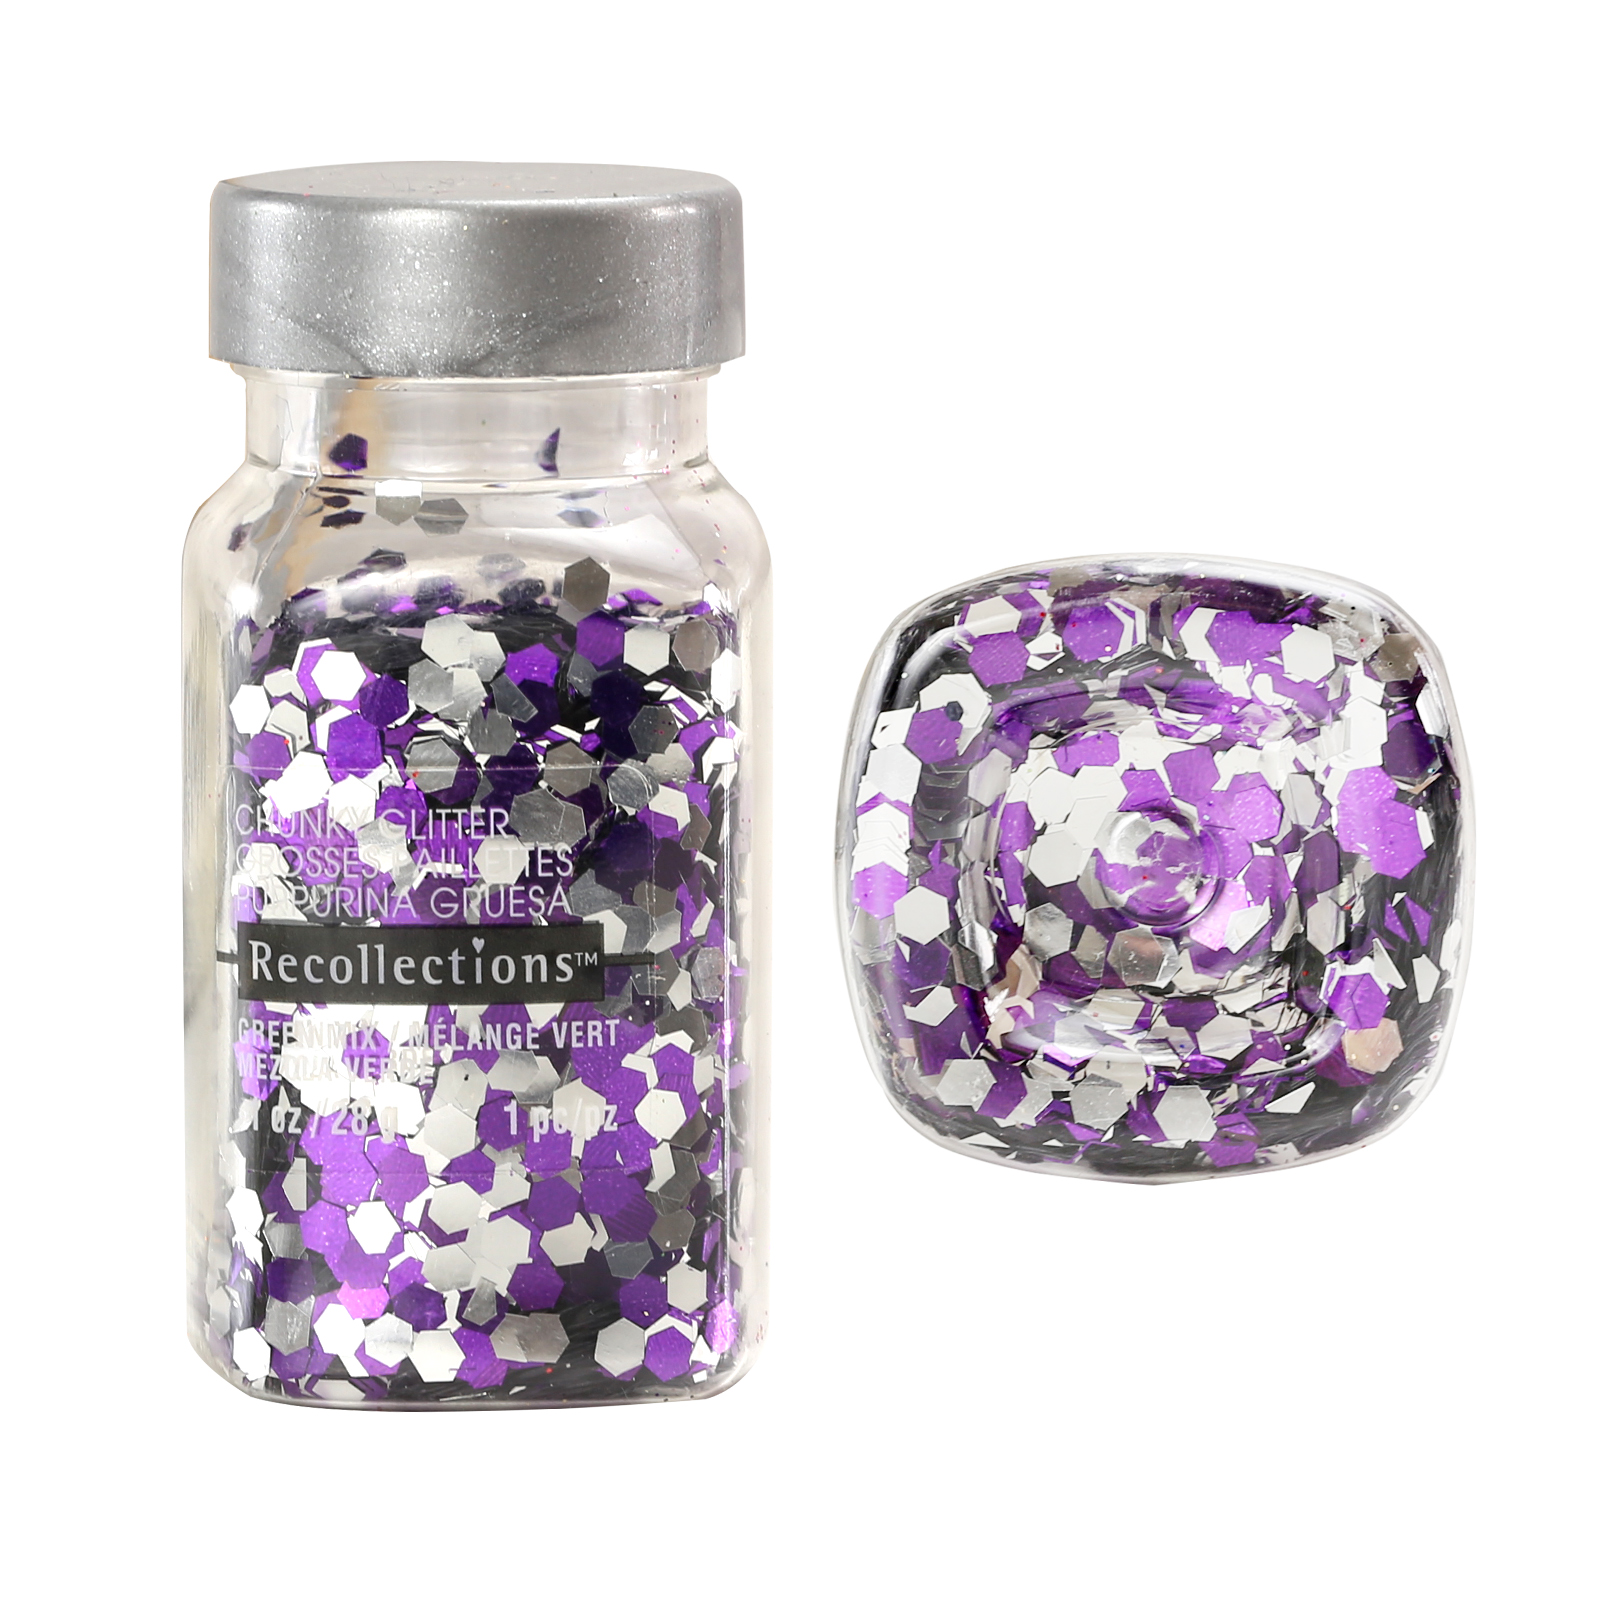 Super Chunky Glitter by Recollections™